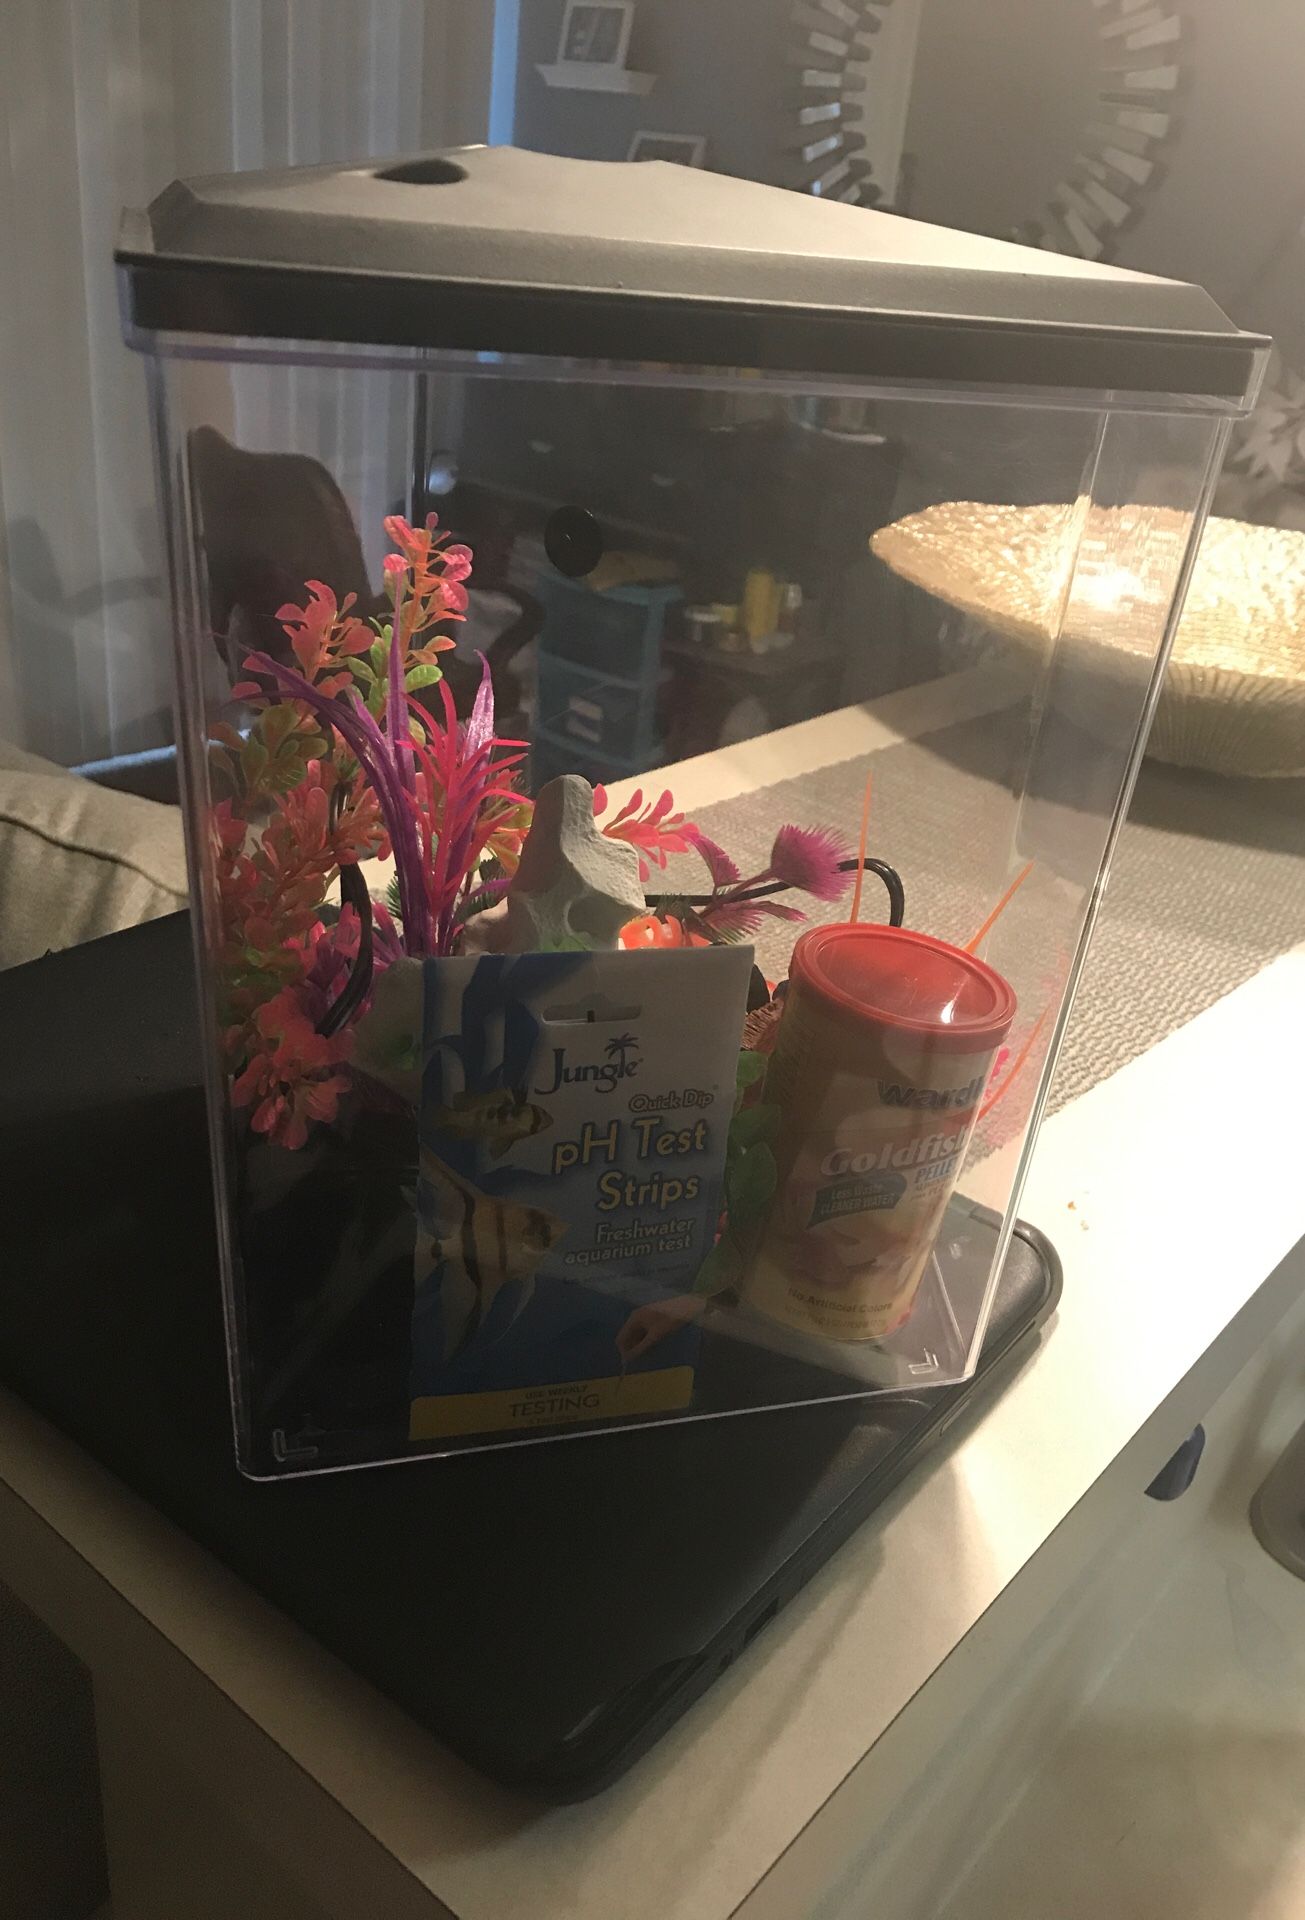 3 gallon fish tank with decor, food and net